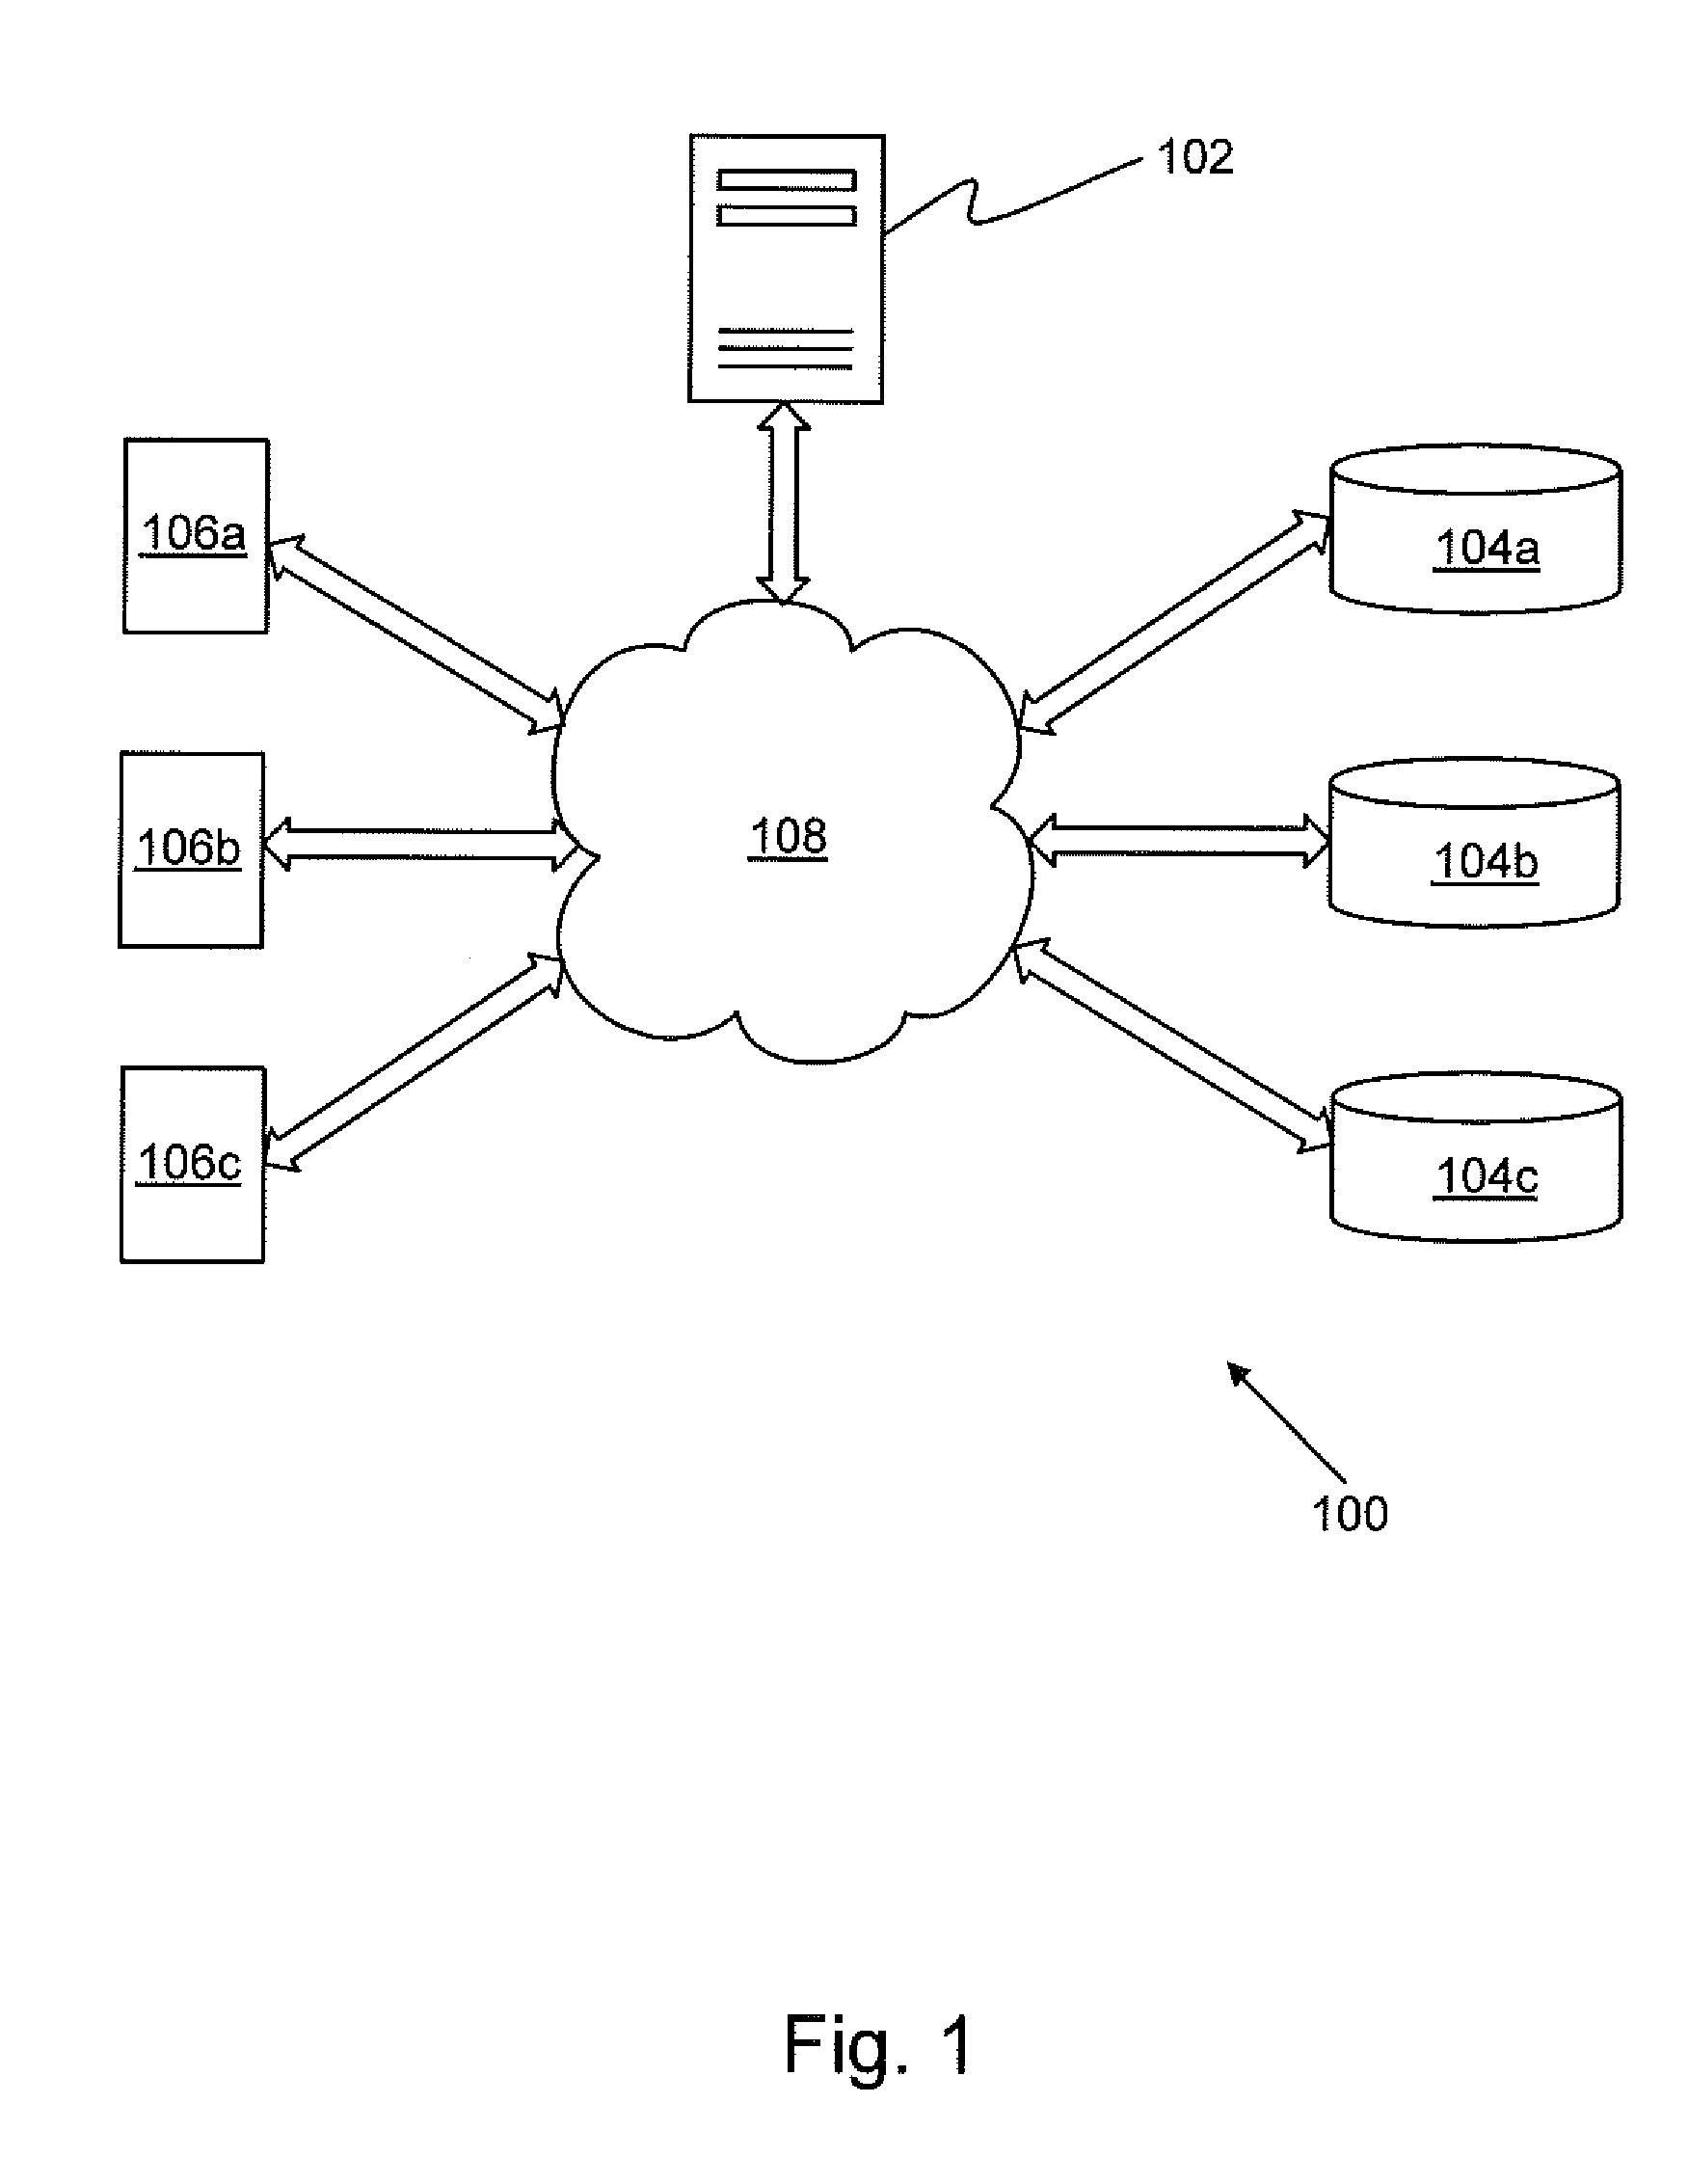 System for processing image data, storing image data and accessing image data